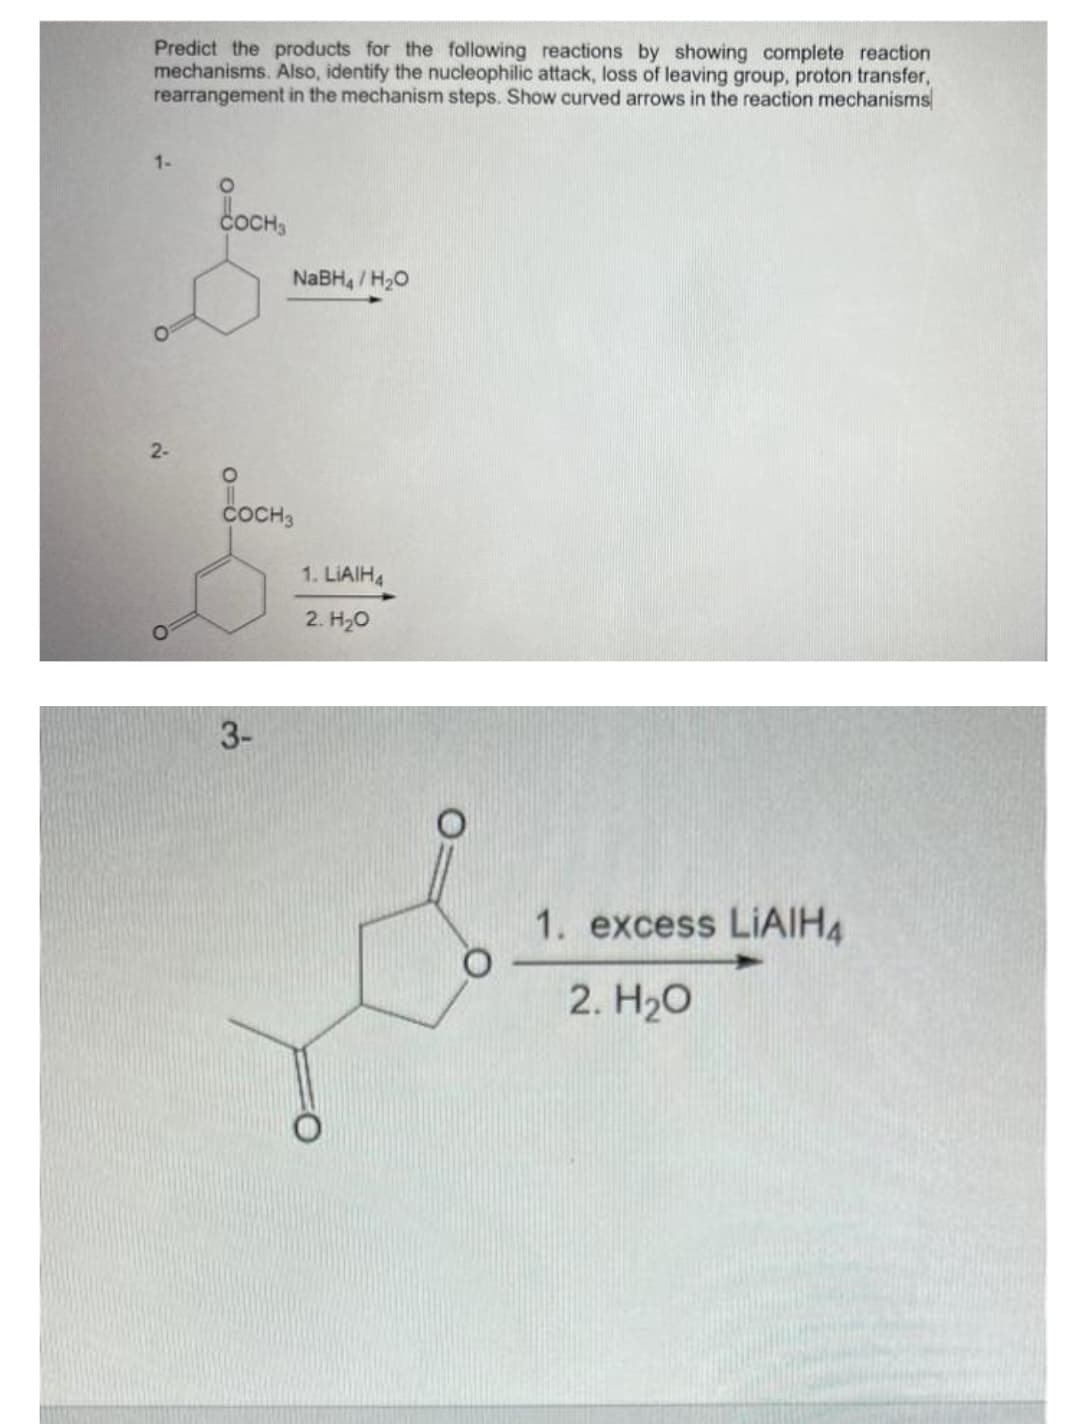 Predict the products for the following reactions by showing complete reaction
mechanisms. Also, identify the nucleophilic attack, loss of leaving group, proton transfer,
rearrangement in the mechanism steps. Show curved arrows in the reaction mechanisms
1-
O
2-
O
COCH3
NaBH4/H₂O
O
COCH 3
3-
1. LIAIH4
2. H₂O
1. excess LIAIHA
2. H₂O